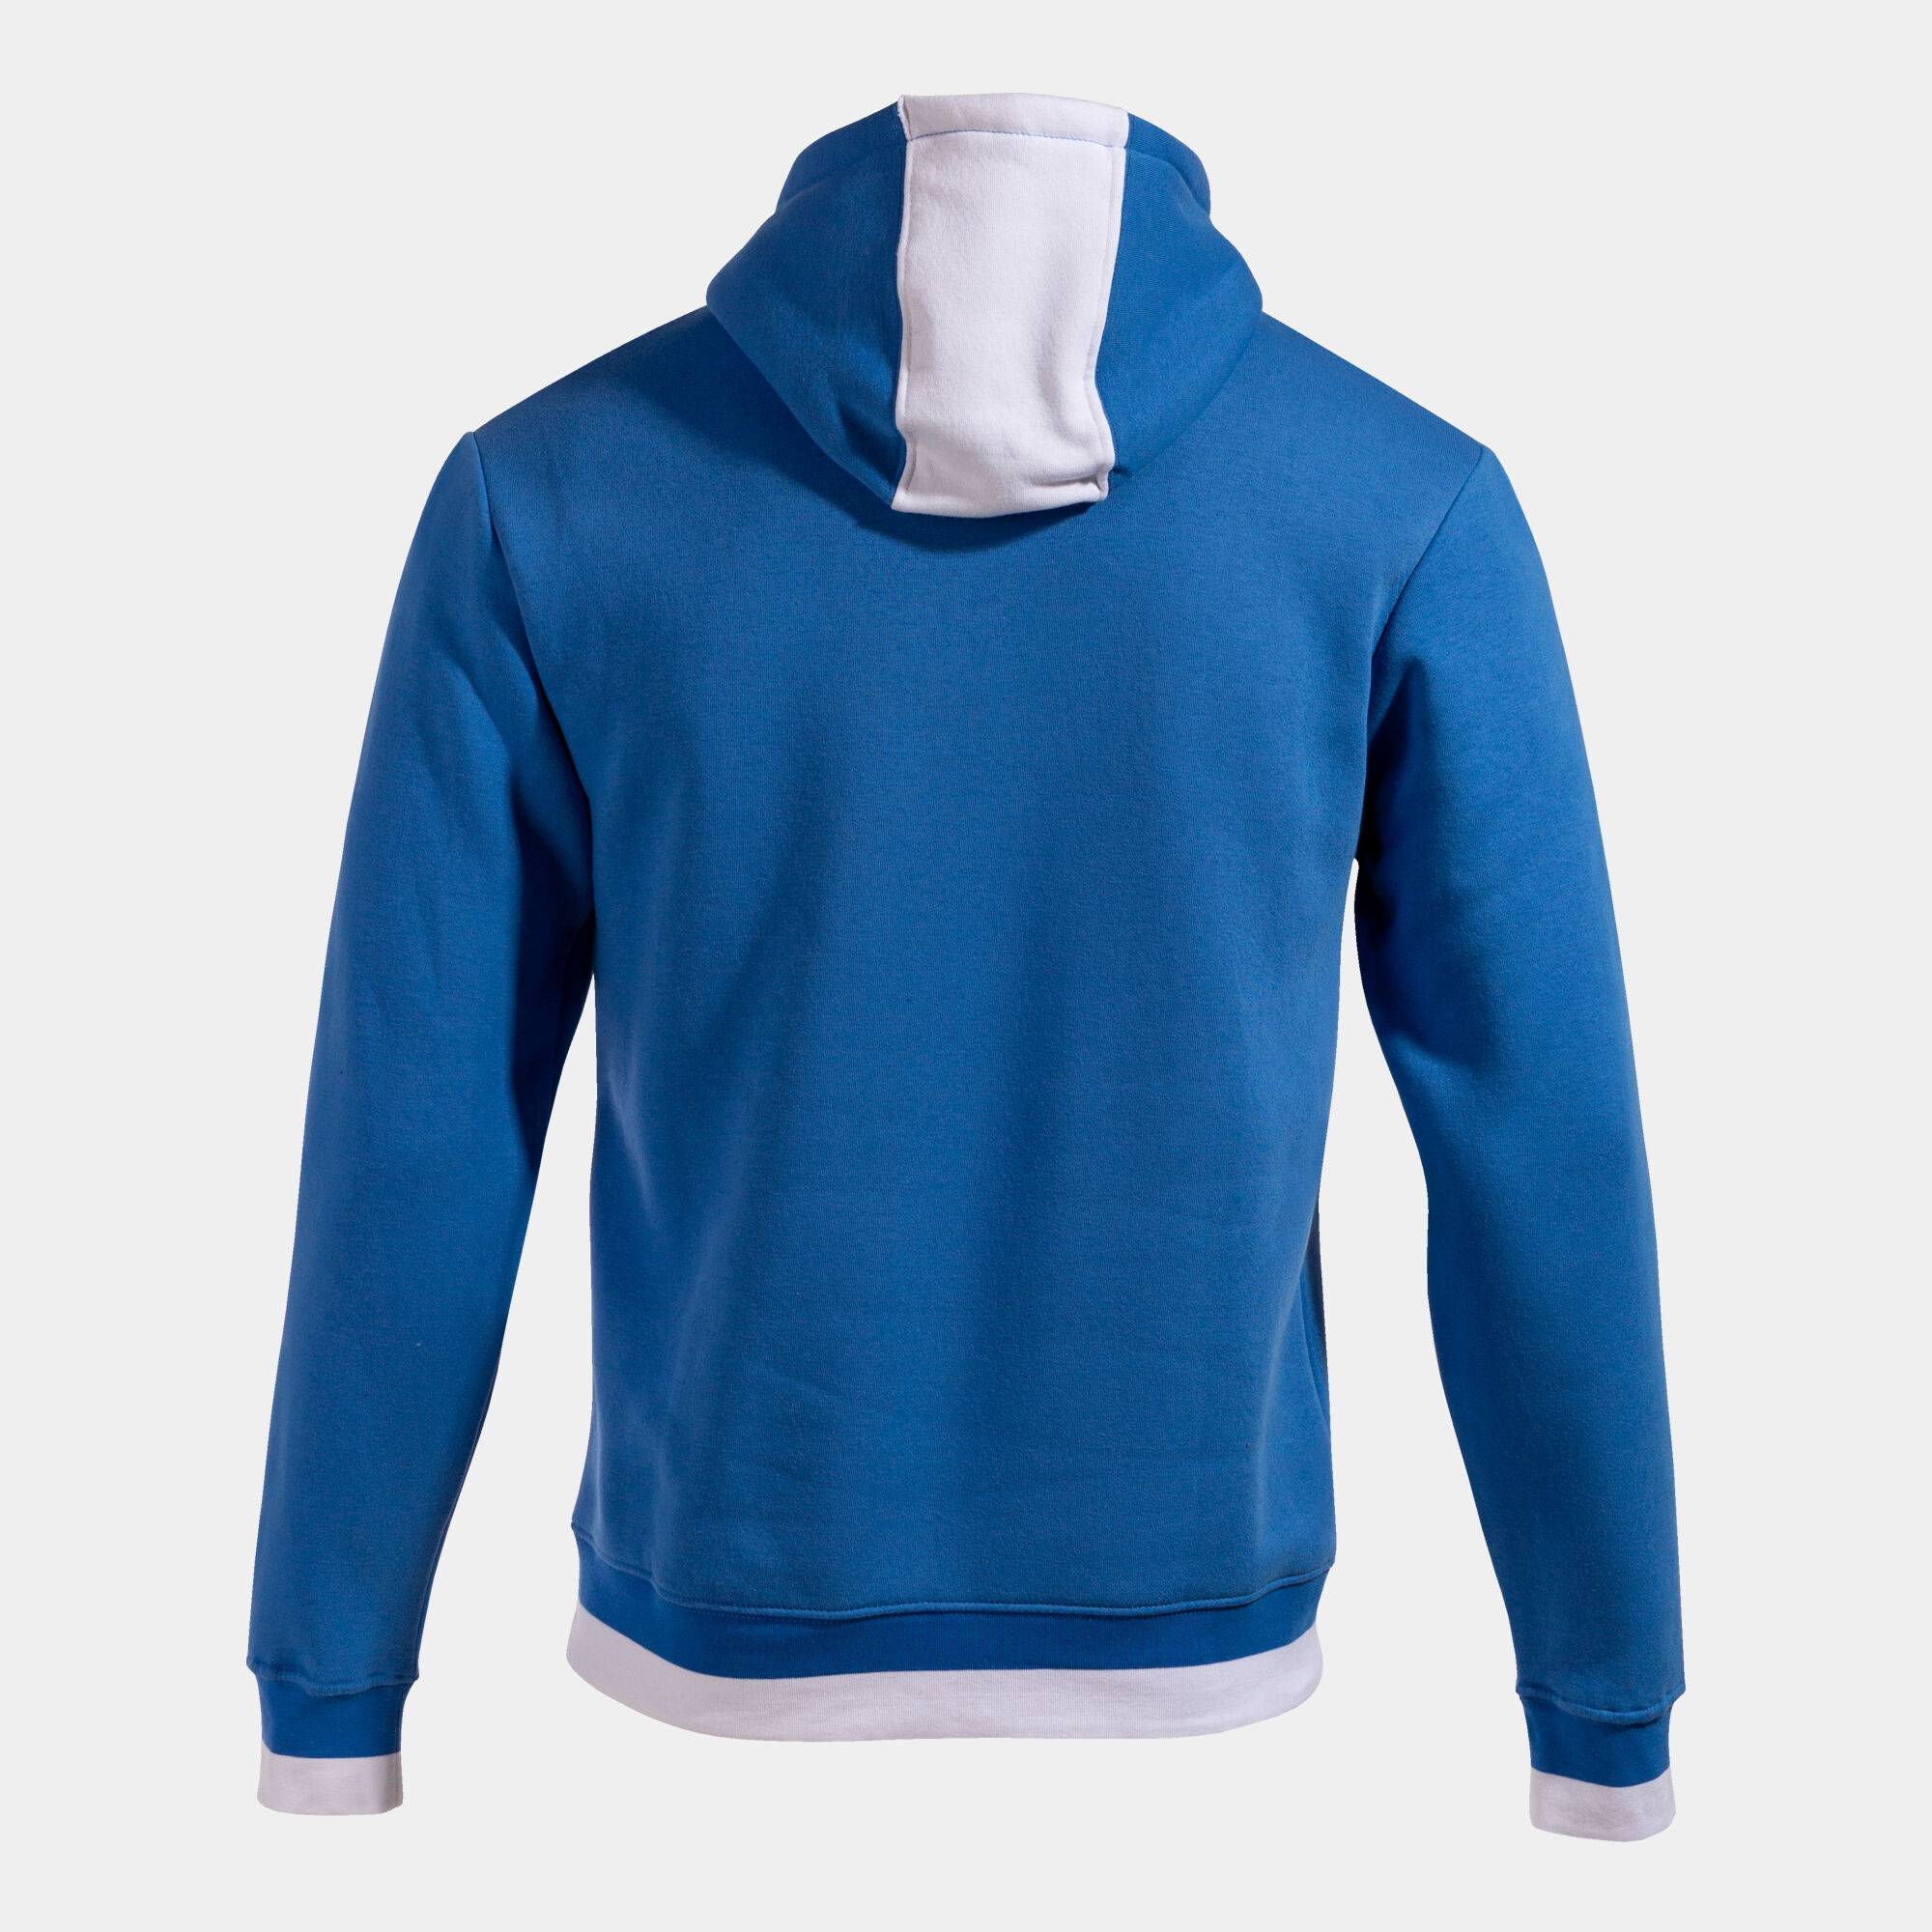 Hooded sweater man Confort II royal blue white